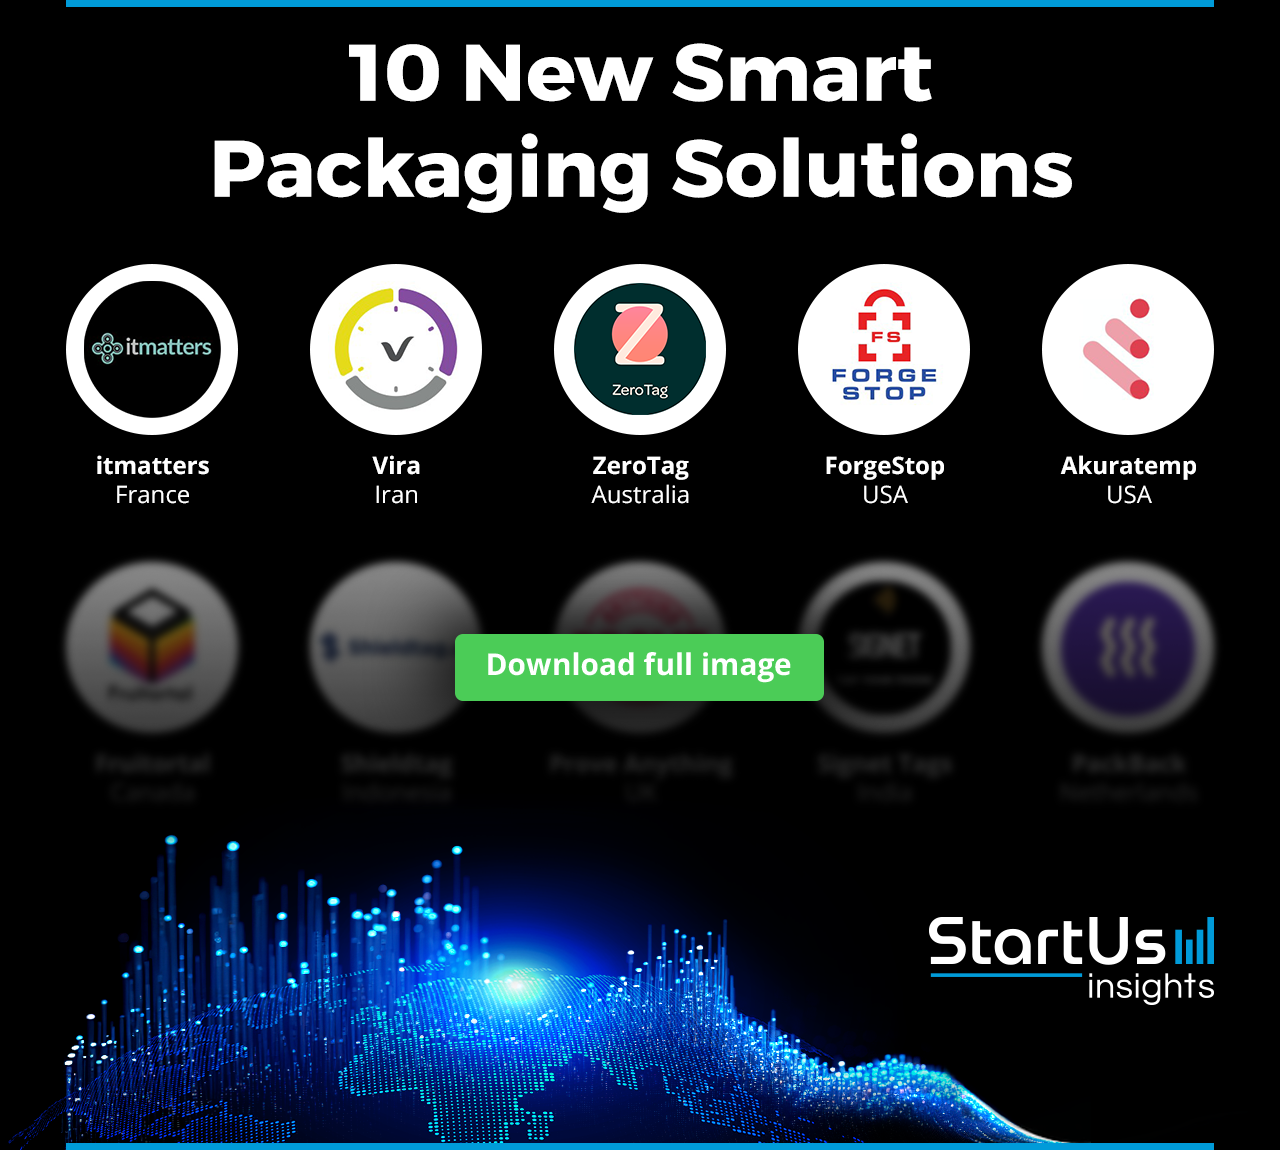 New-Smart-Packaging-Solutions-Logos-Blurred-StartUs-Insights-noresize